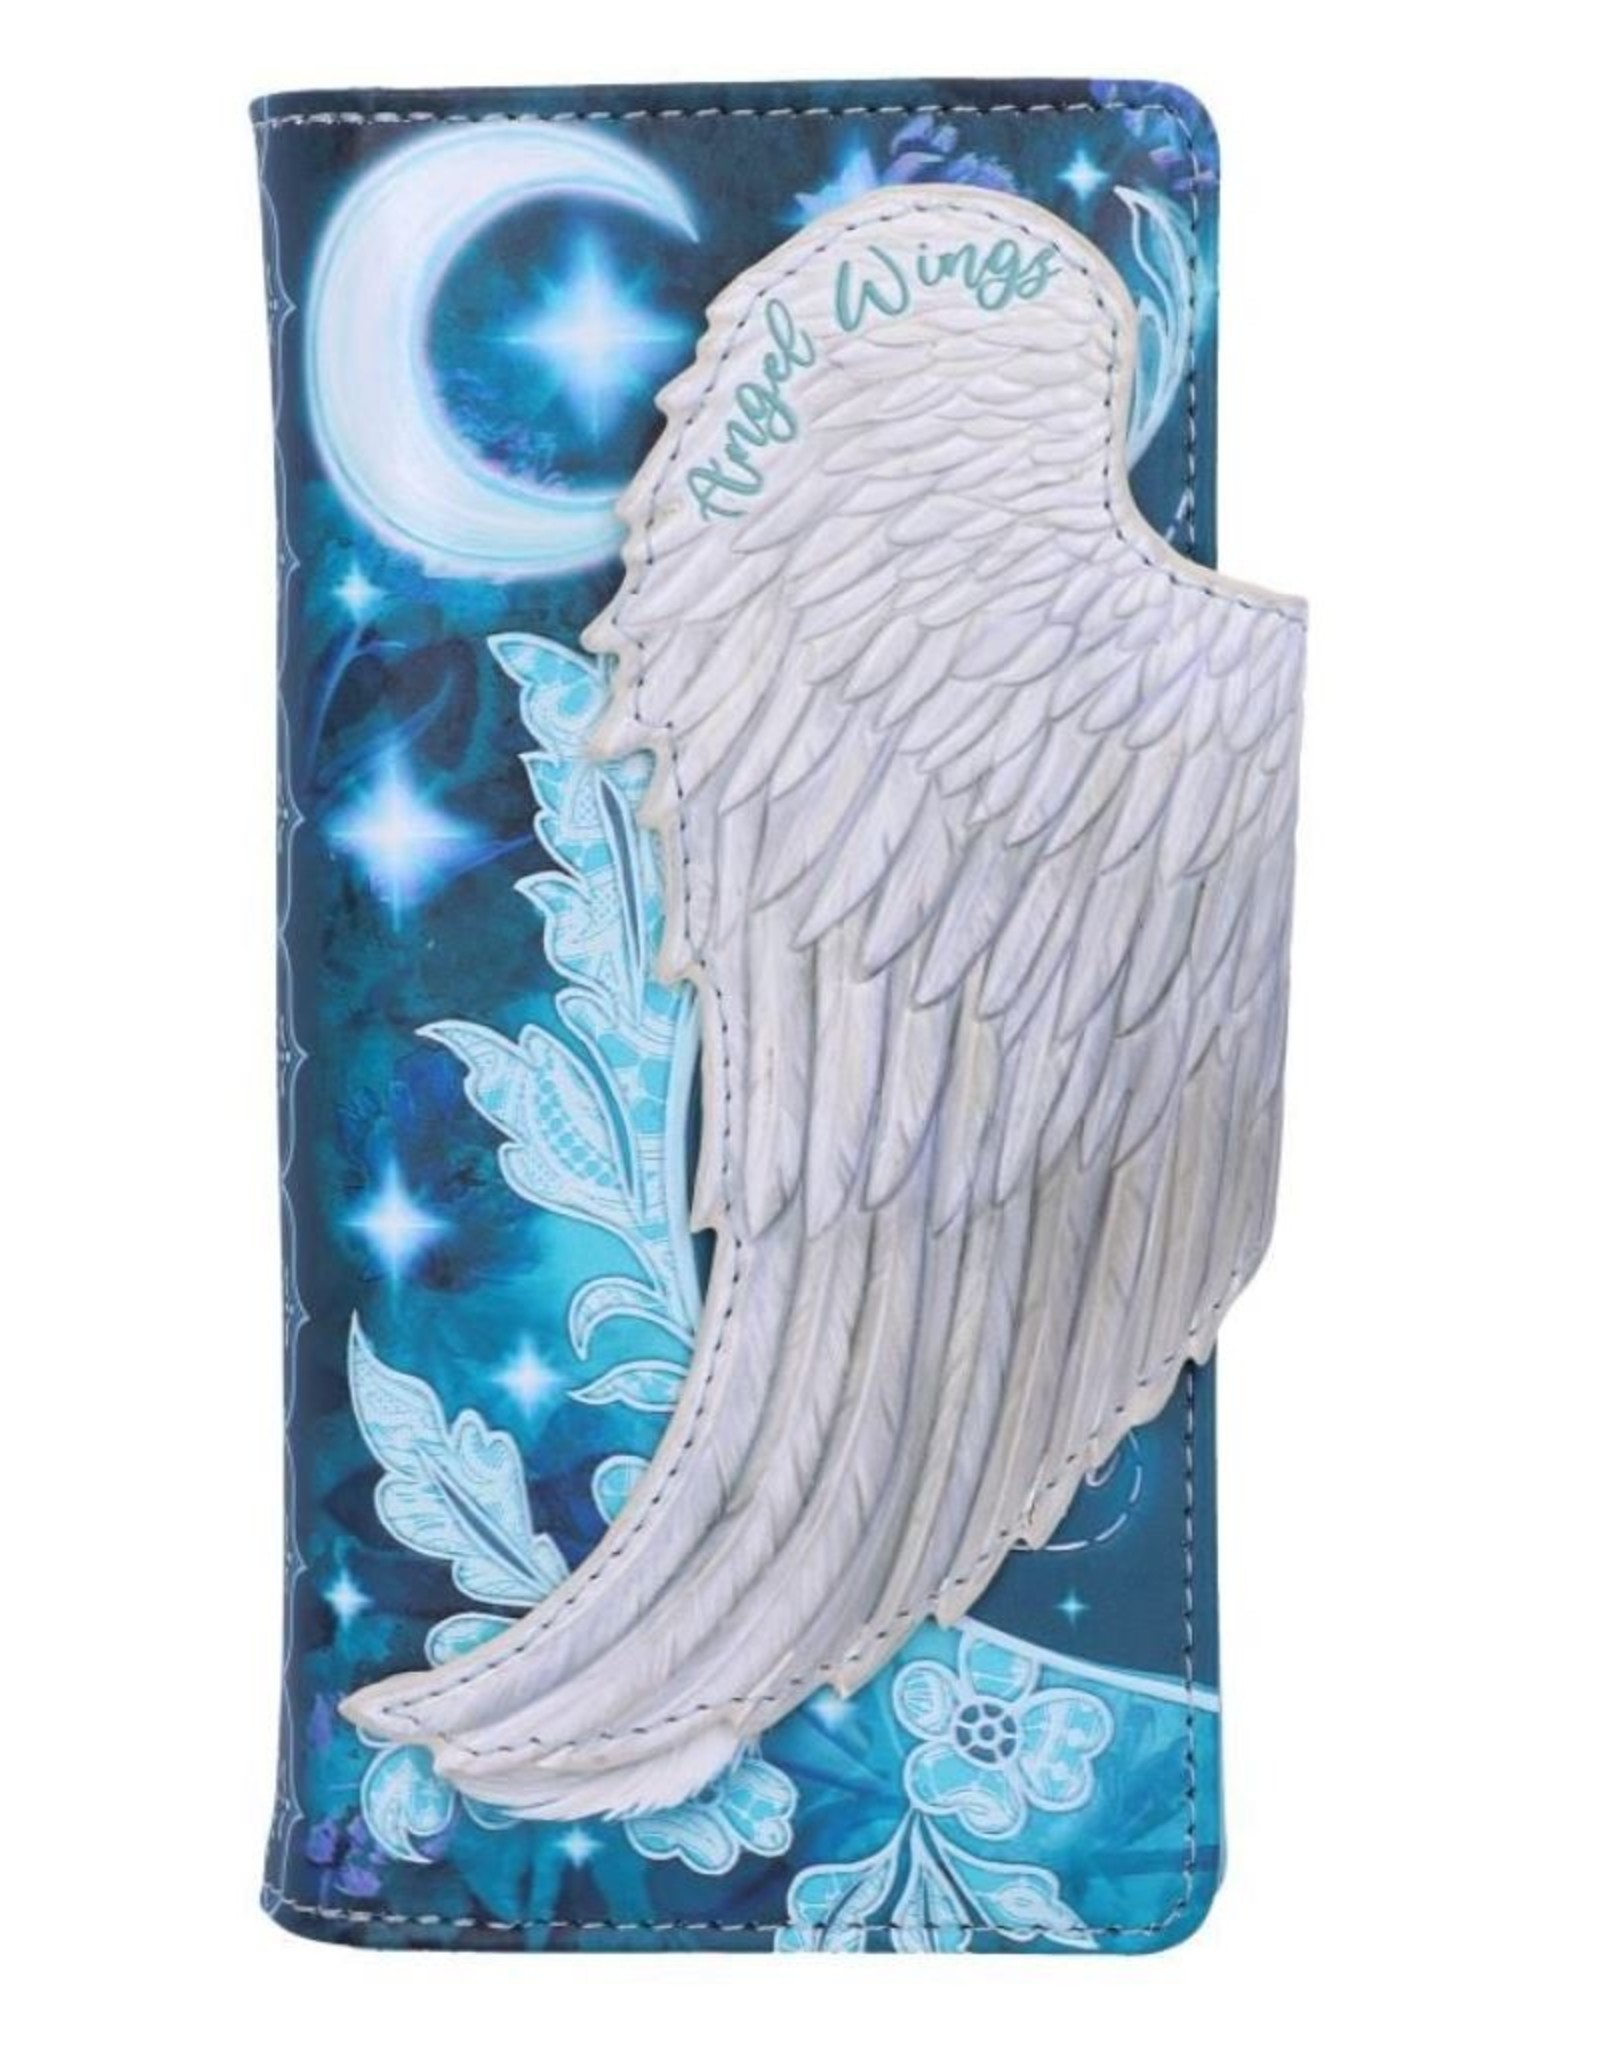 NemesisNow Gothic wallets and purses - Angel Wings Embossed Purse Nemesis Now